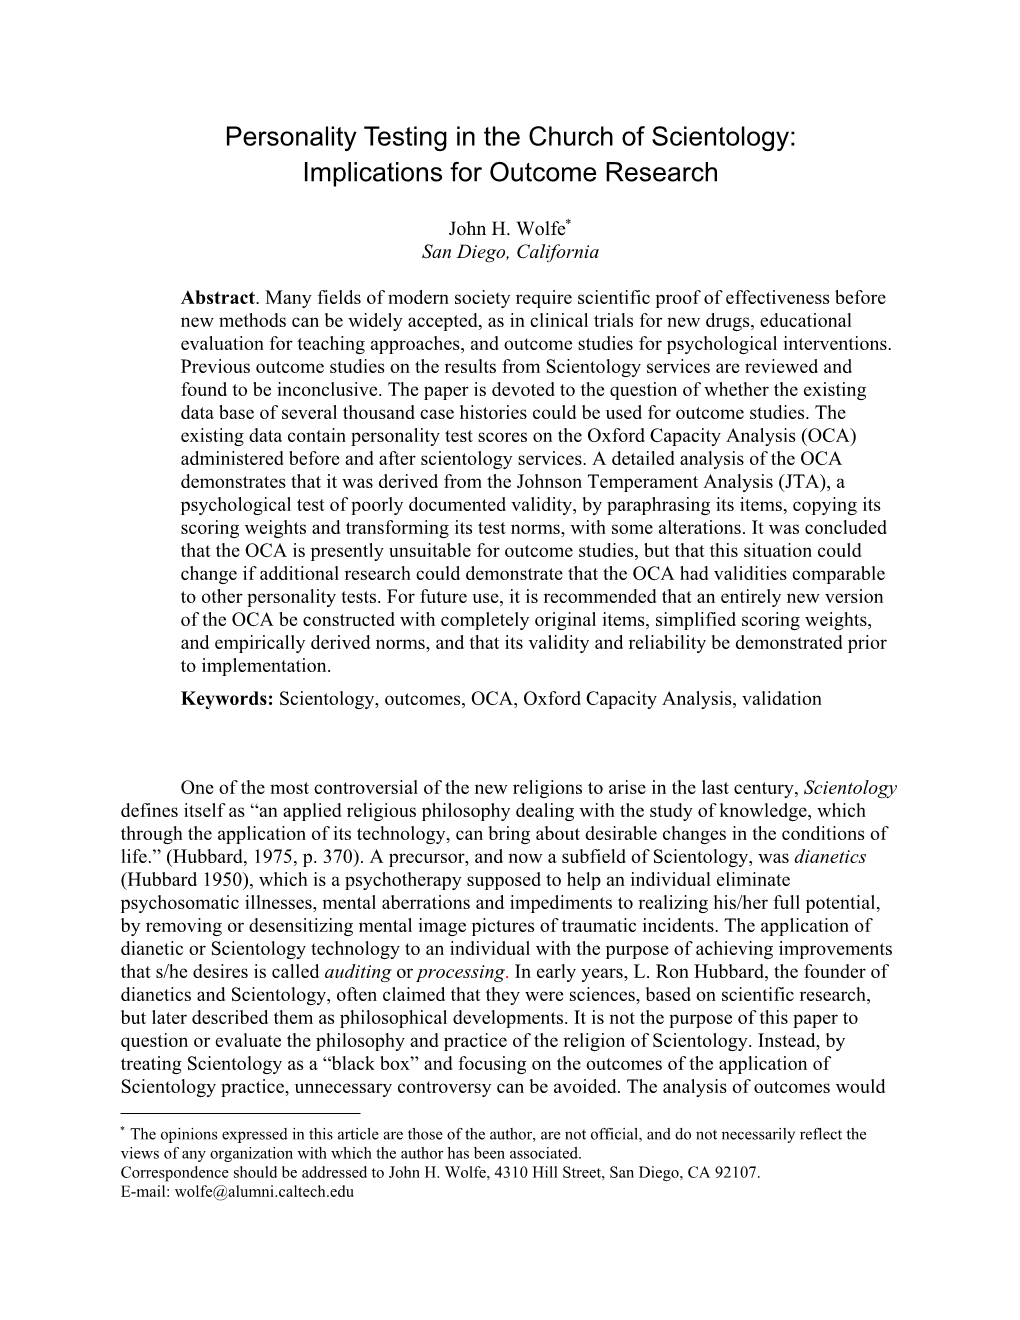 Personality Testing in the Church of Scientology: Implications for Outcome Research